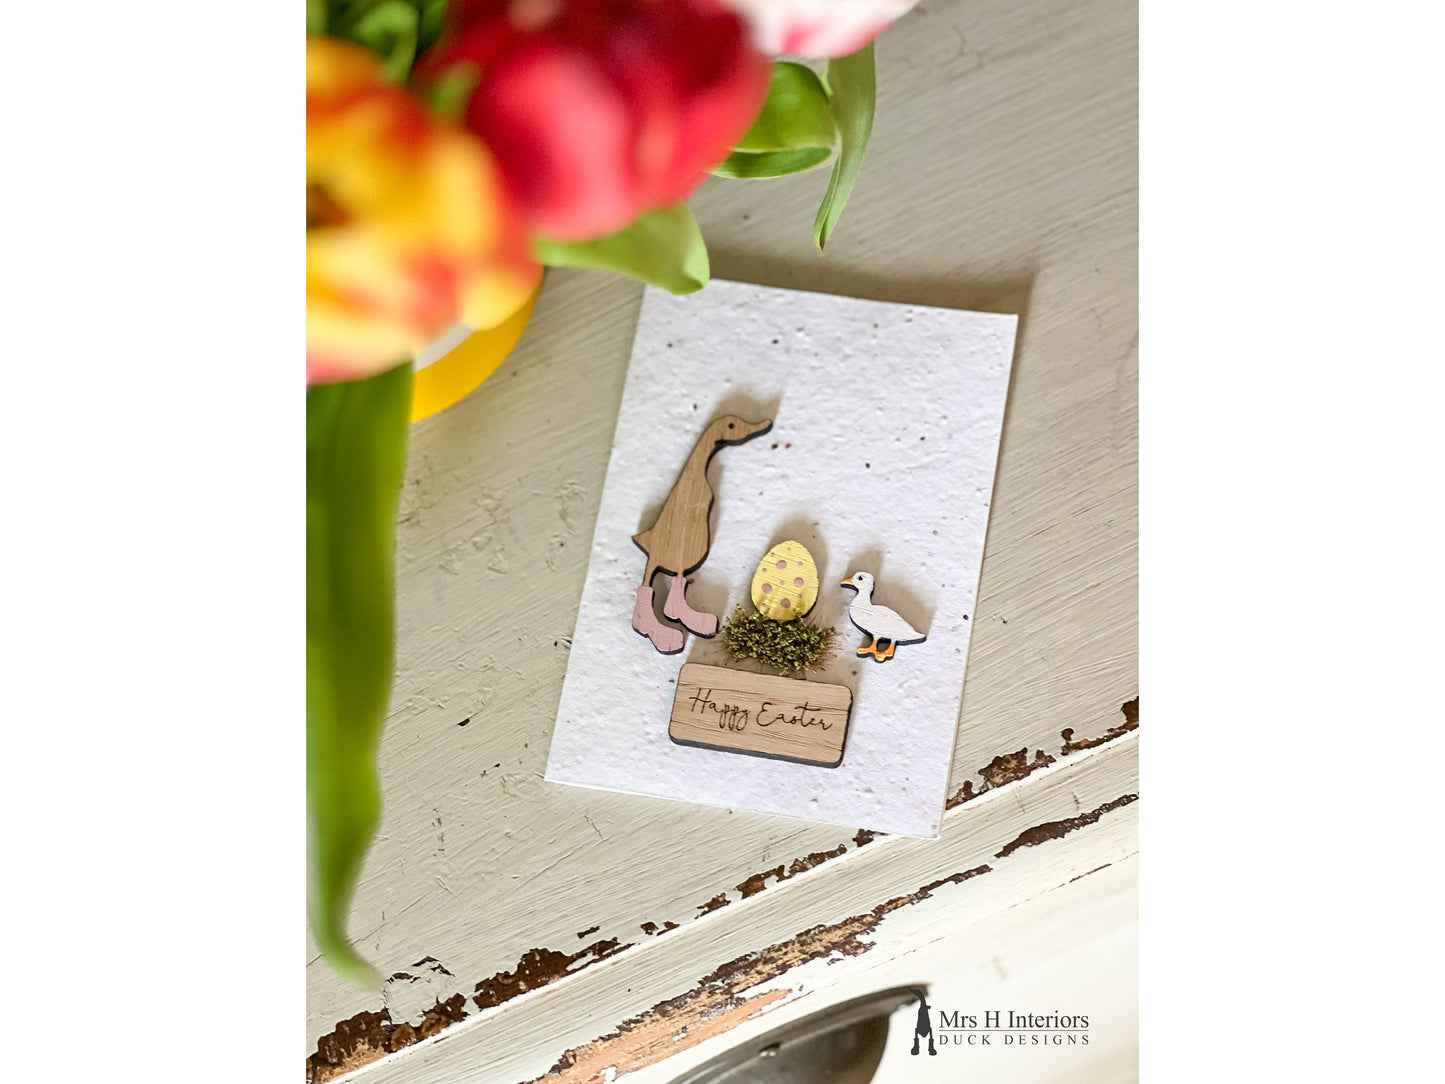 Happy Easter Card - Duckling and Egg - Decorated Wooden Duck in Boots by Mrs H the Duck Lady